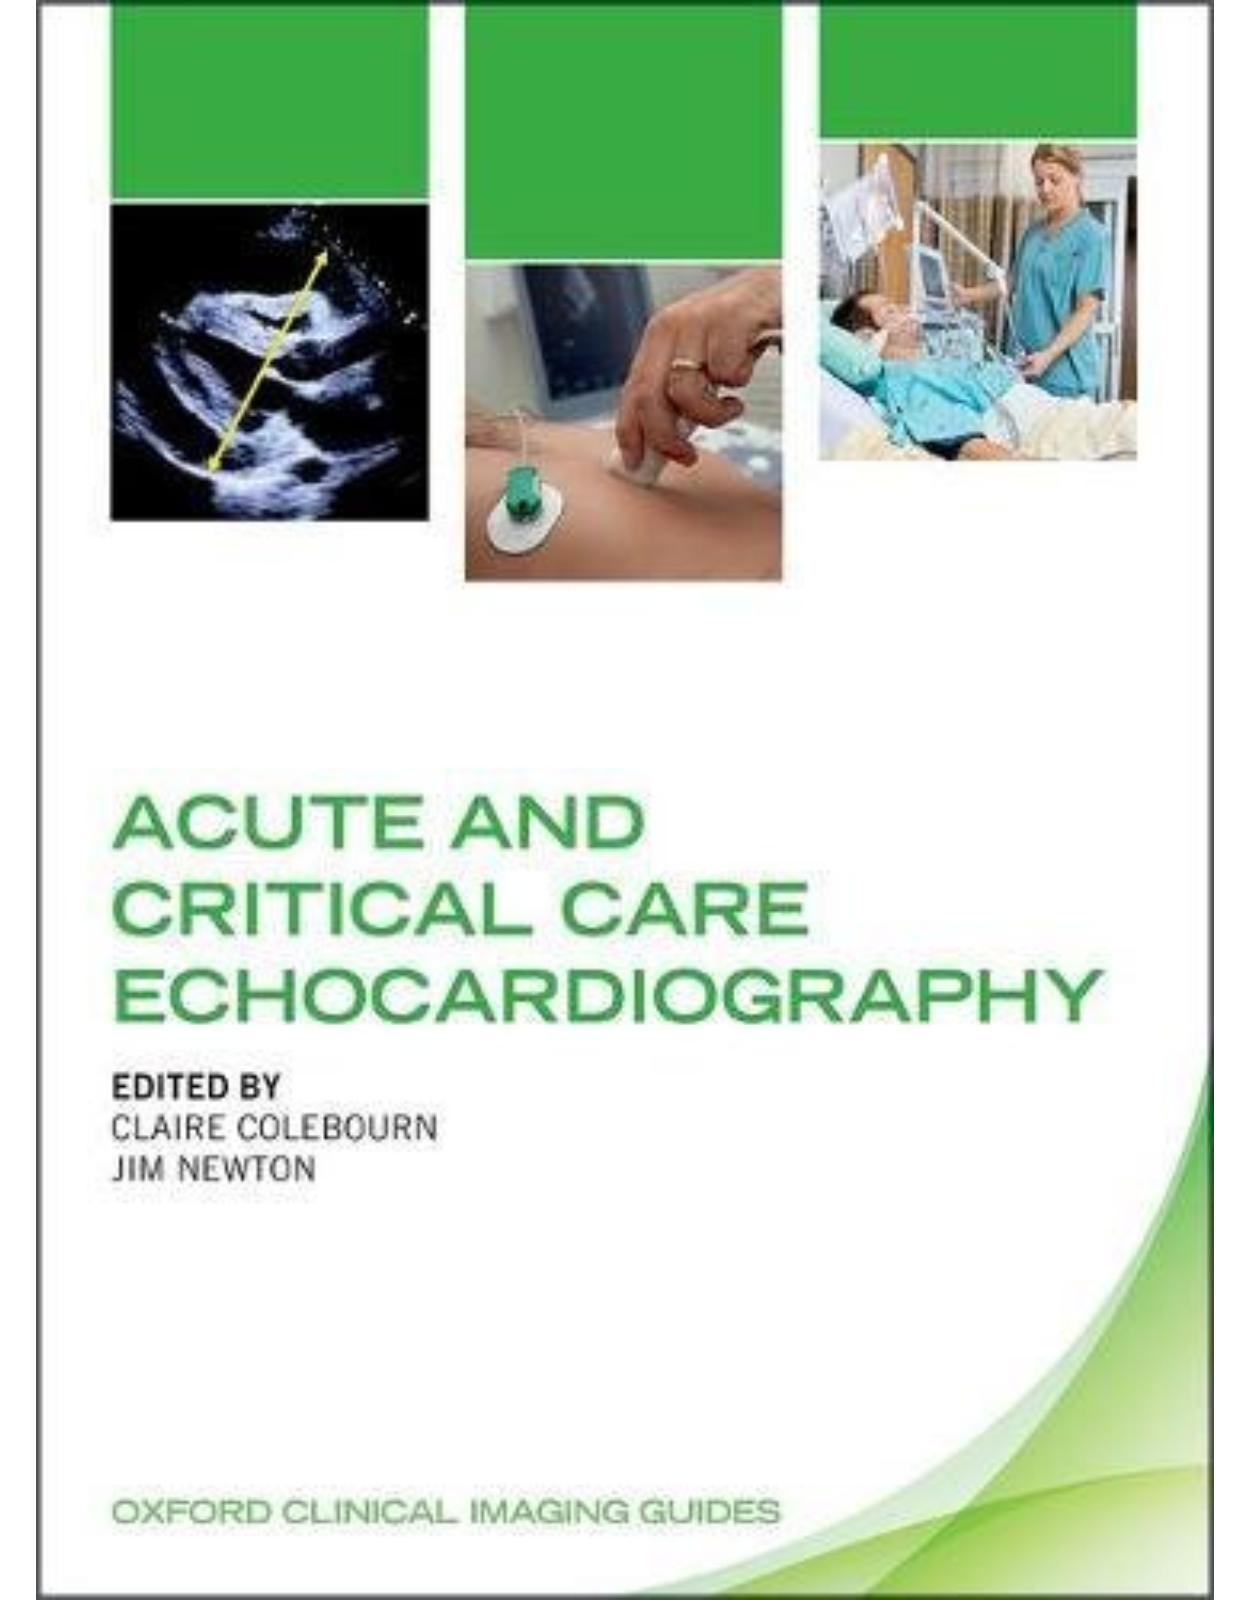 Acute and Critical Care Echocardiography (Oxford Clinical Imaging Guides)